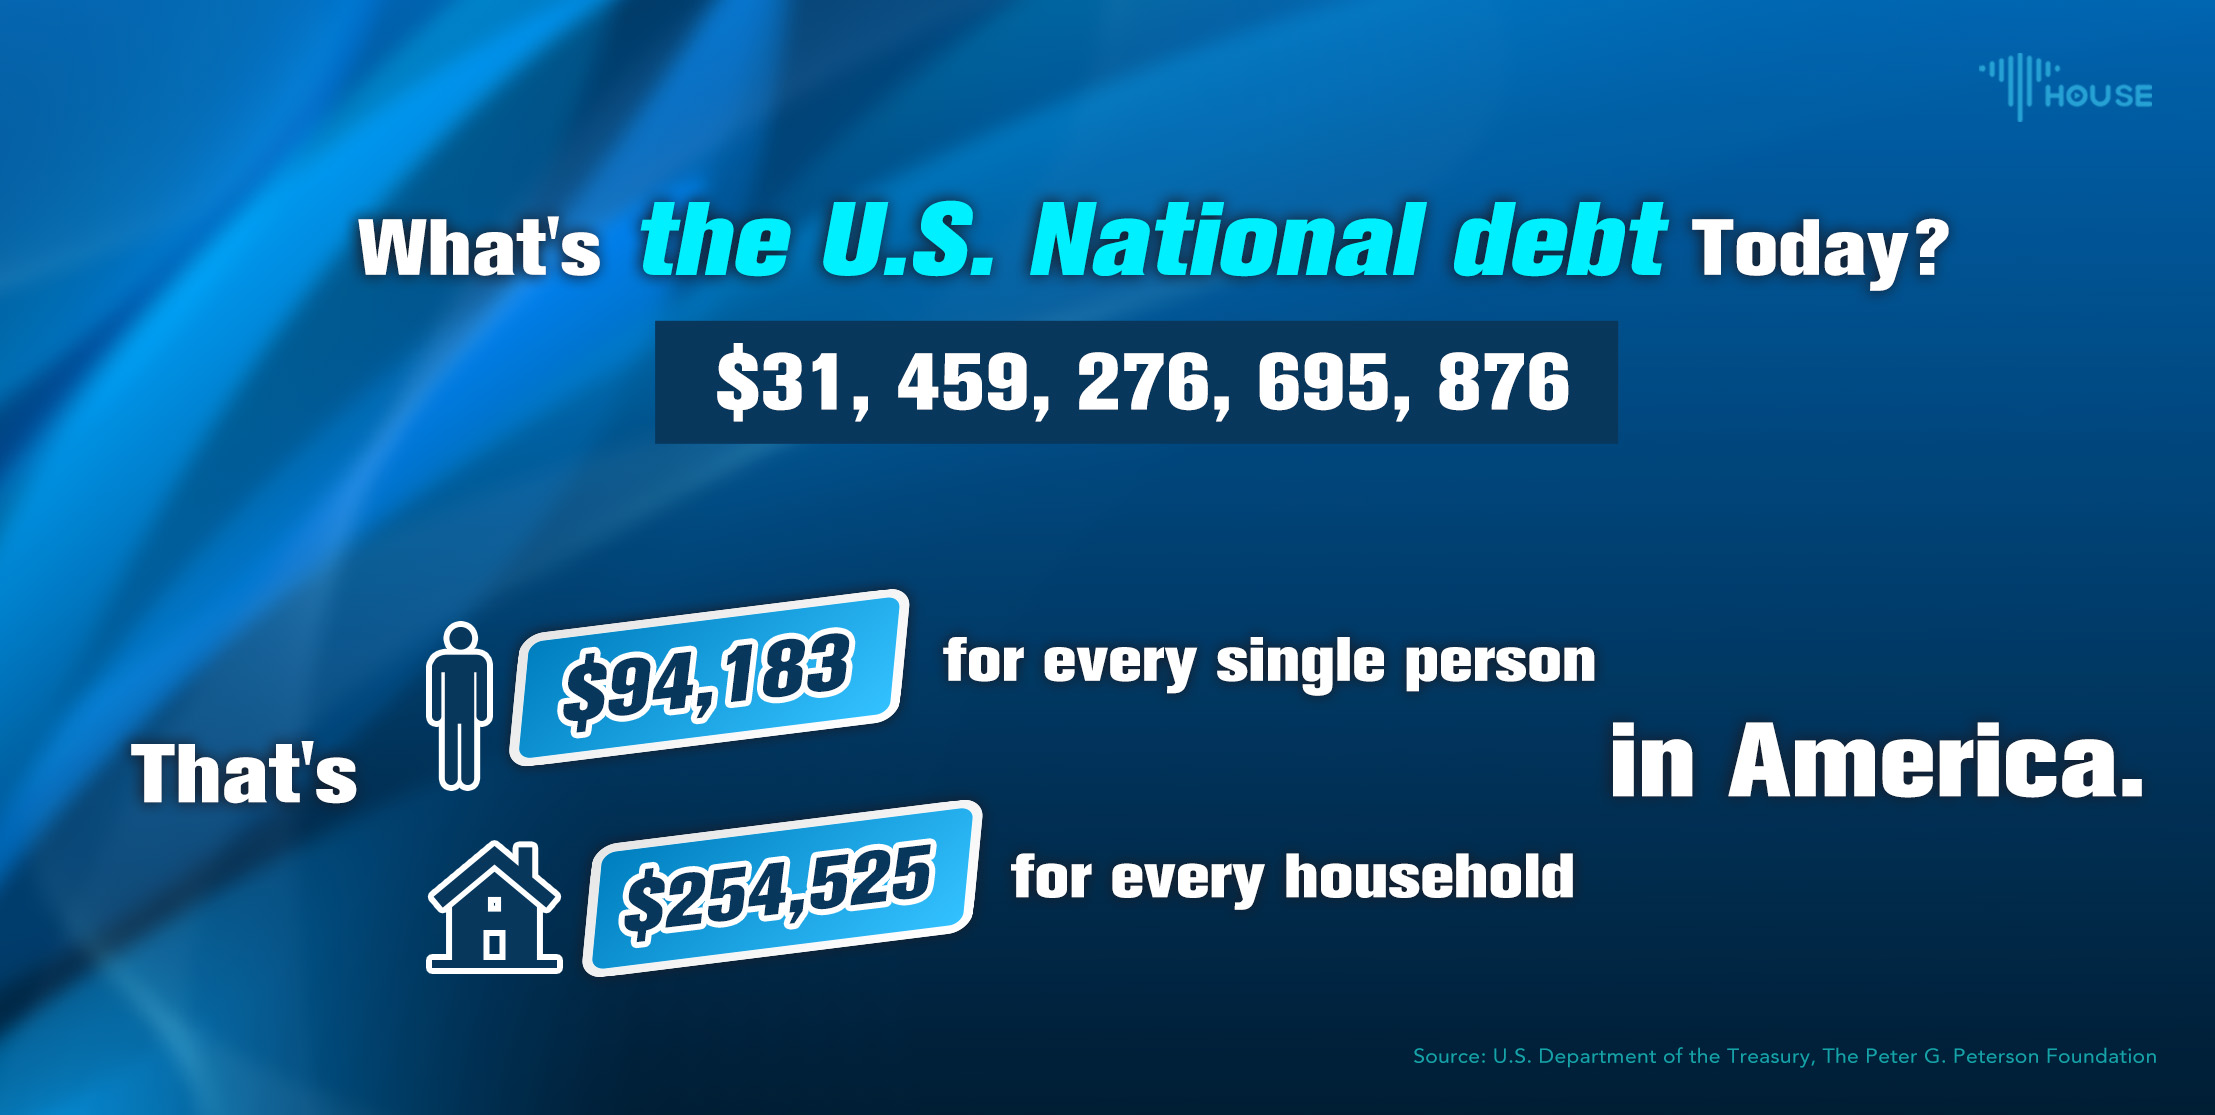 U.S. national debt now stands at about $31.5 trillion